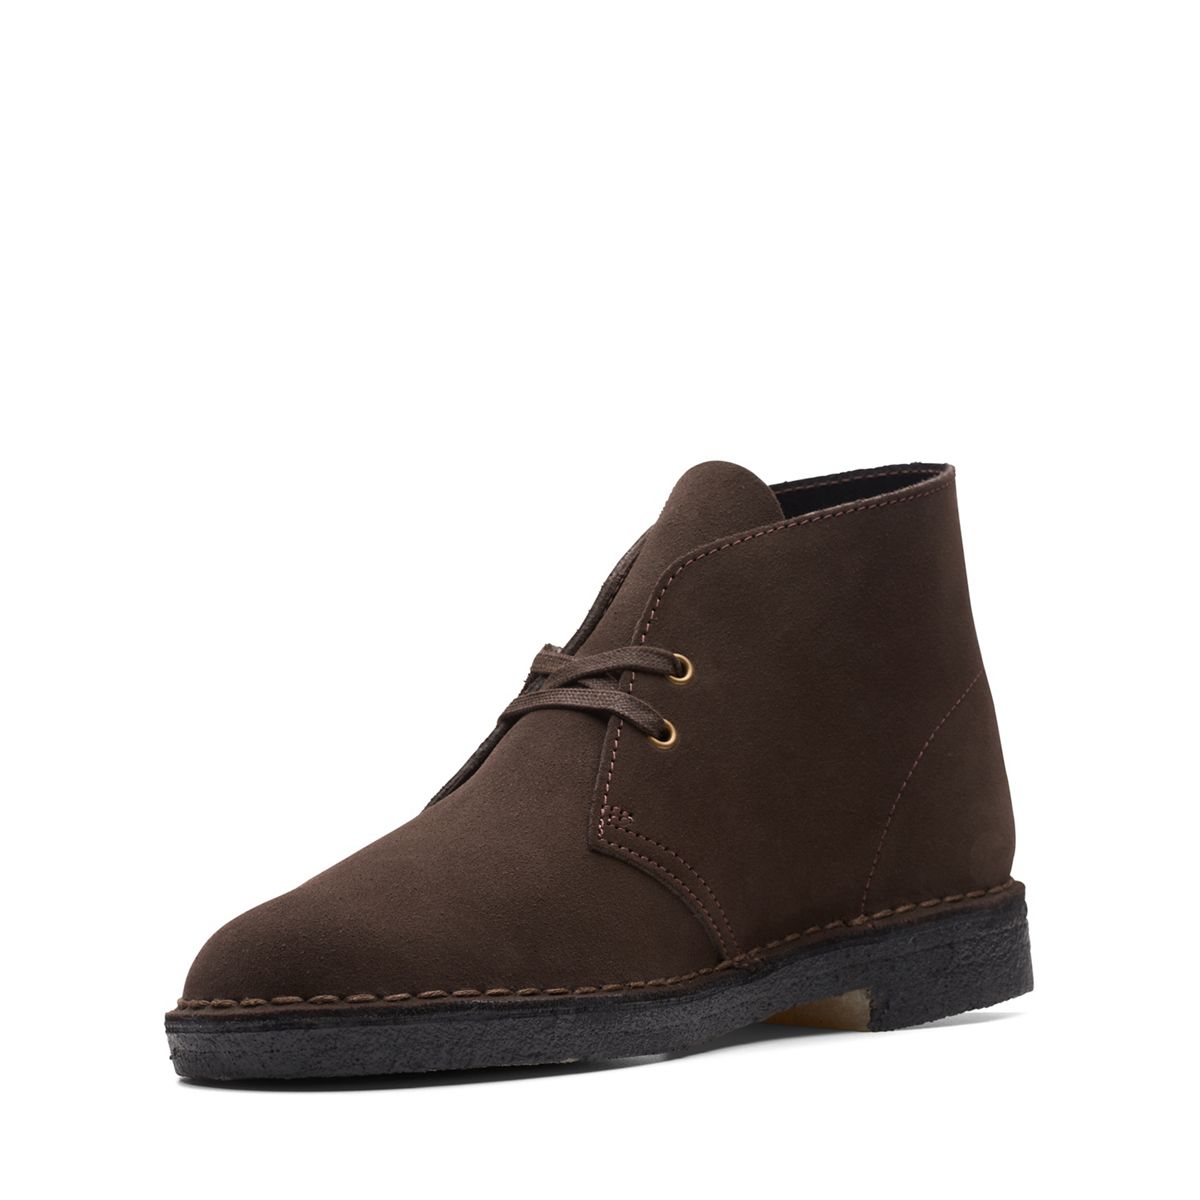 Desert Boot Brown - Clarks Canada Official Site | Clarks Shoes